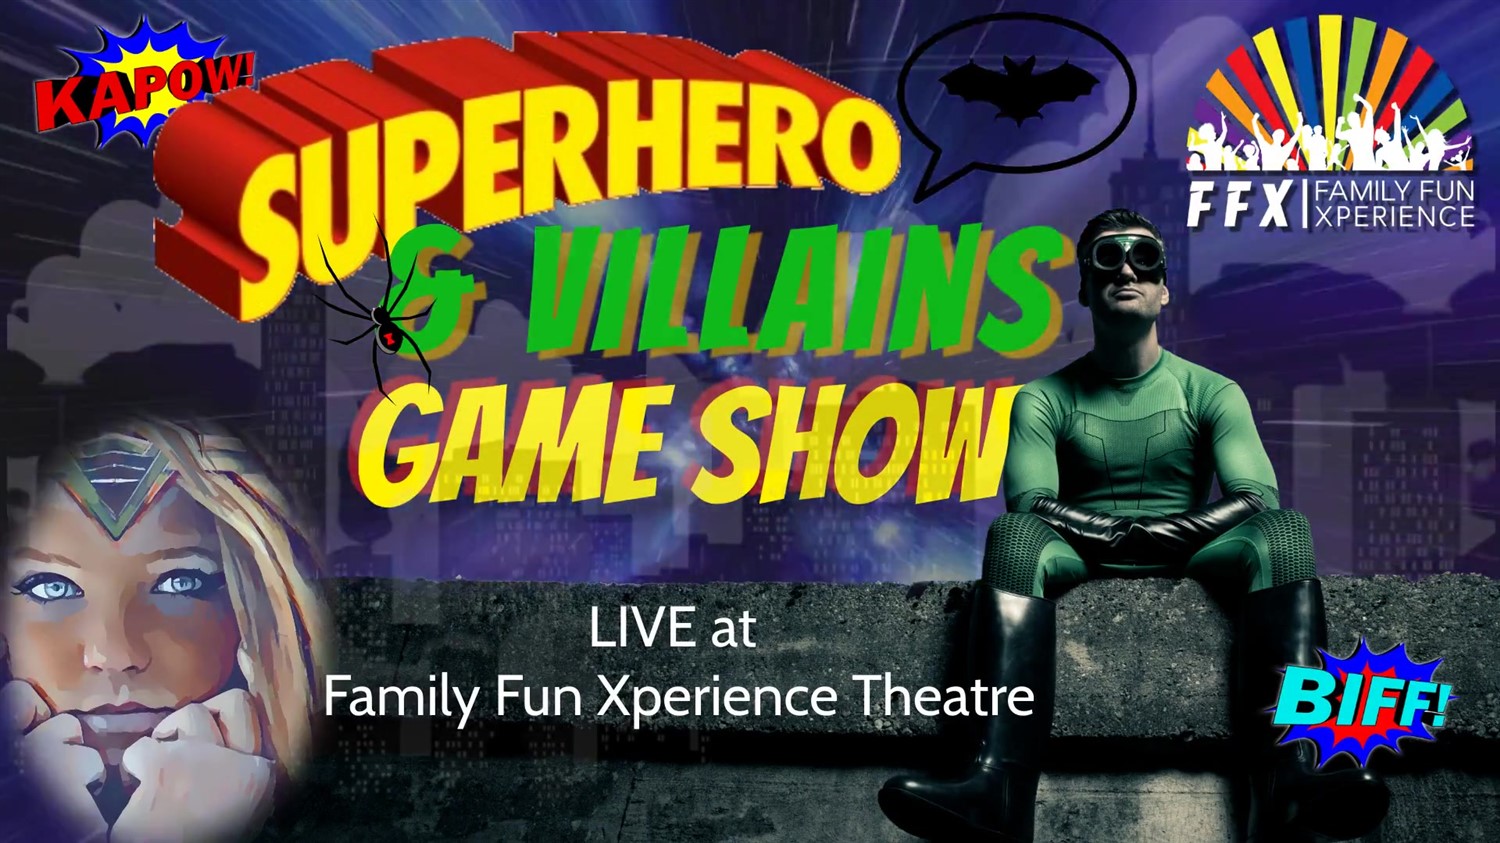 Superheroes & Villains Live Game Show Super fun for everyone! on mar. 05, 19:00@FFX Theatre - Buy tickets and Get information on Family Fun Xperience tickets.ffxshow.org